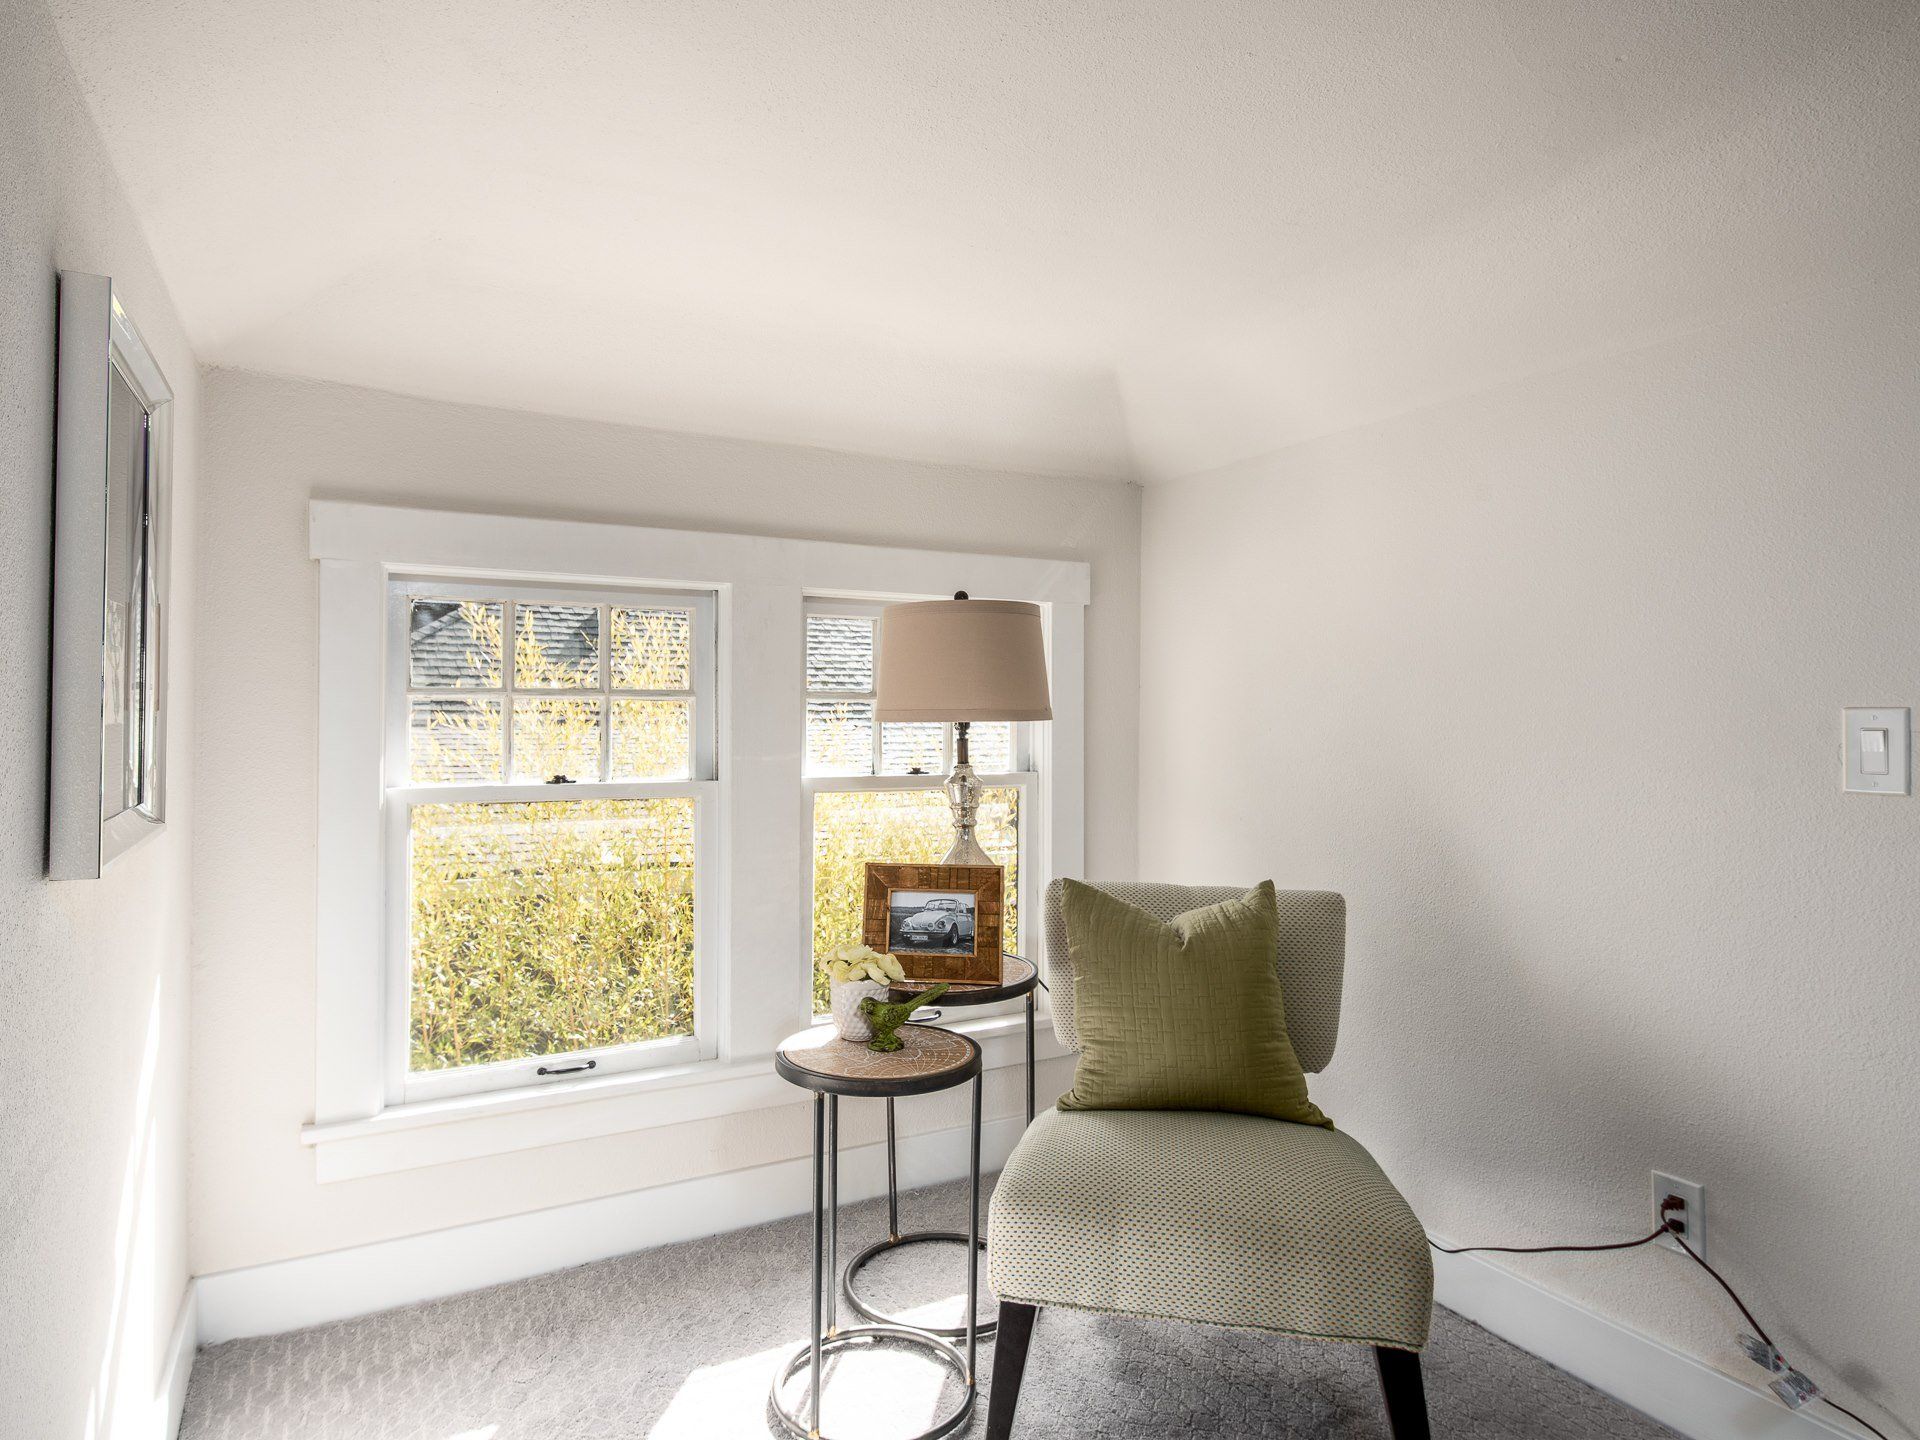 Picture of a chair and lamp in front of a window.